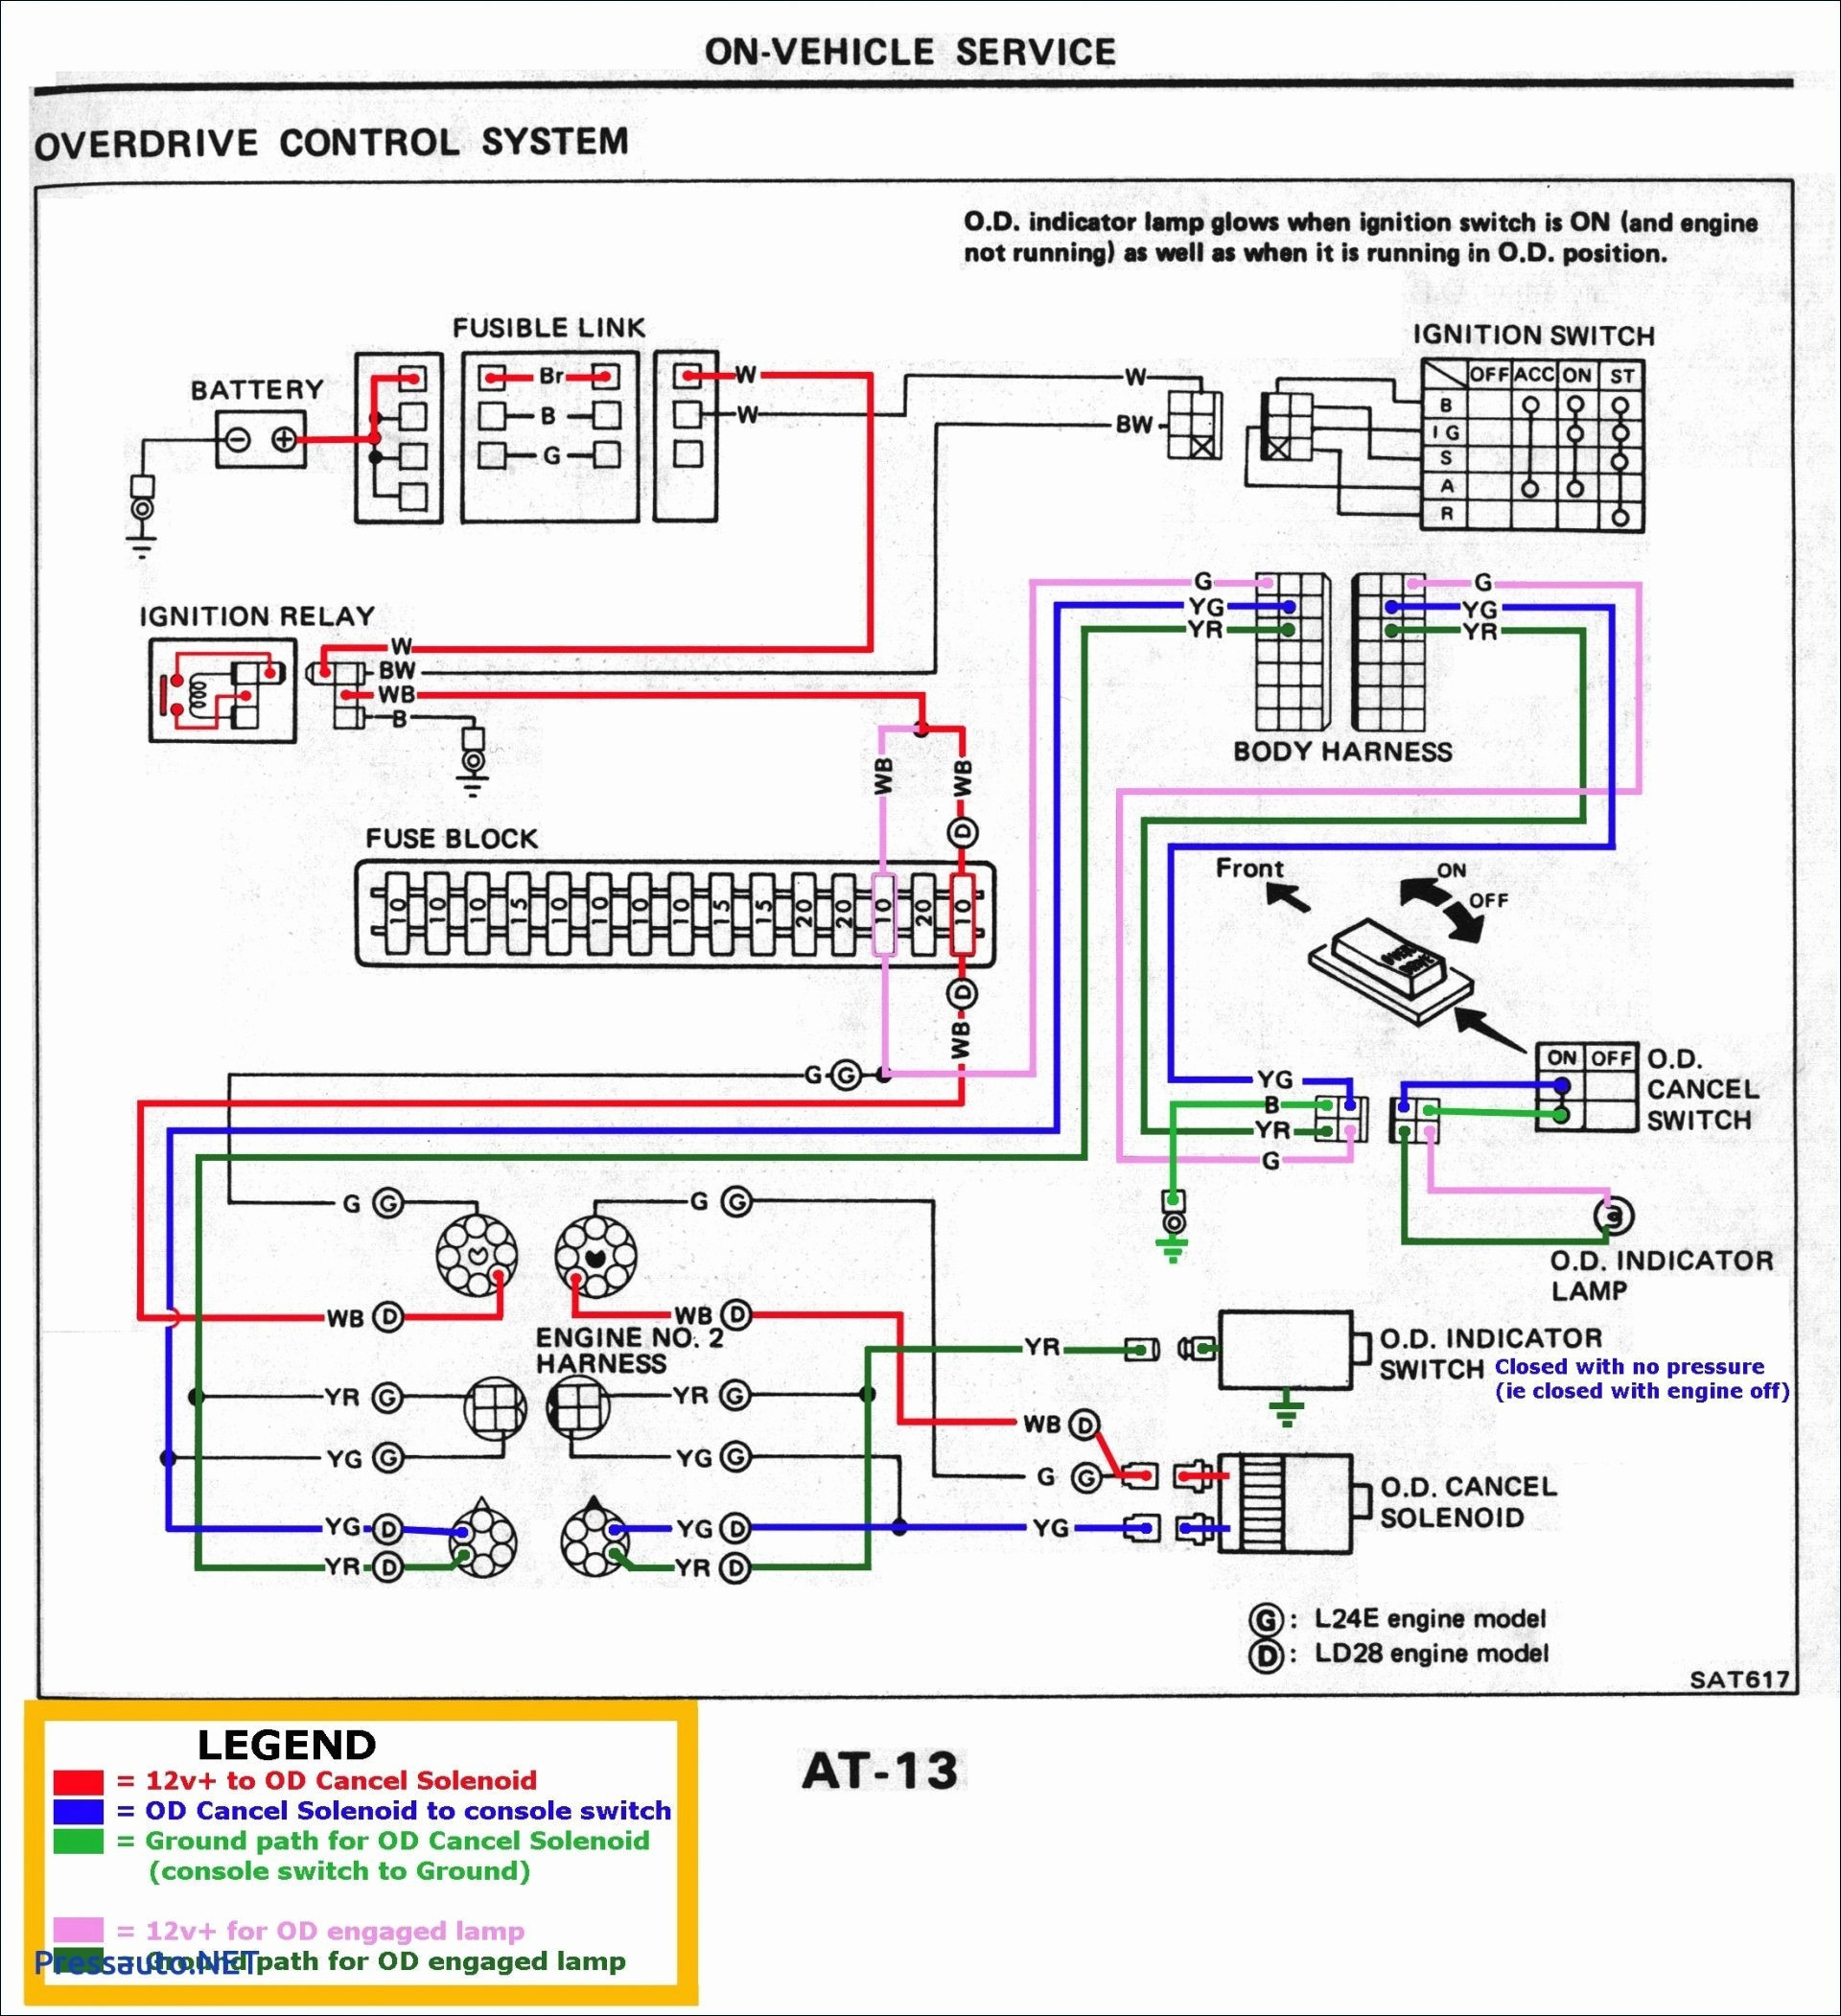 Freightliner Chassis Wiring Diagram Freightliner Columbia Wiring Diagrams Diagram Home Kenworth T800